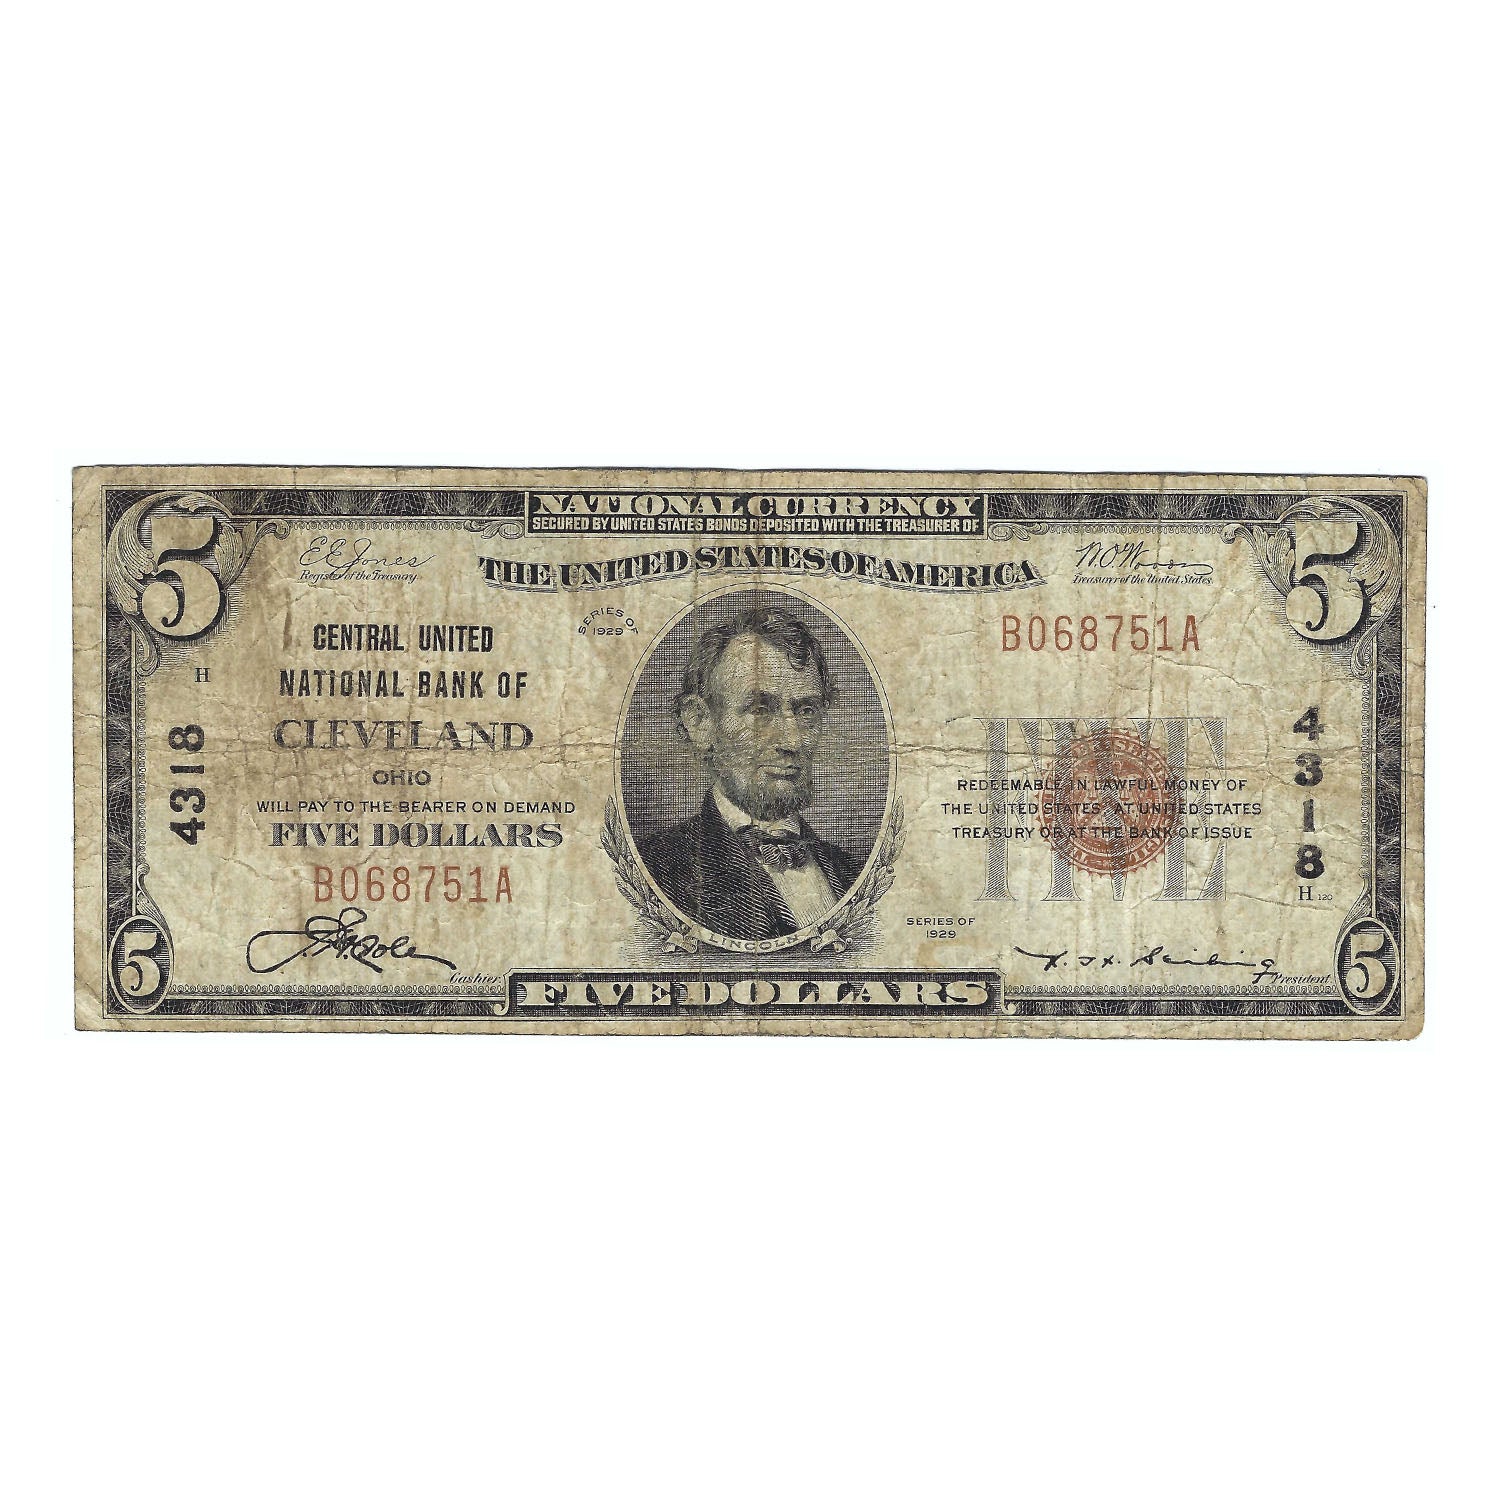 1929 $5 Small Size National Bank Note, Central United NB of Cleveland, OH Circulated